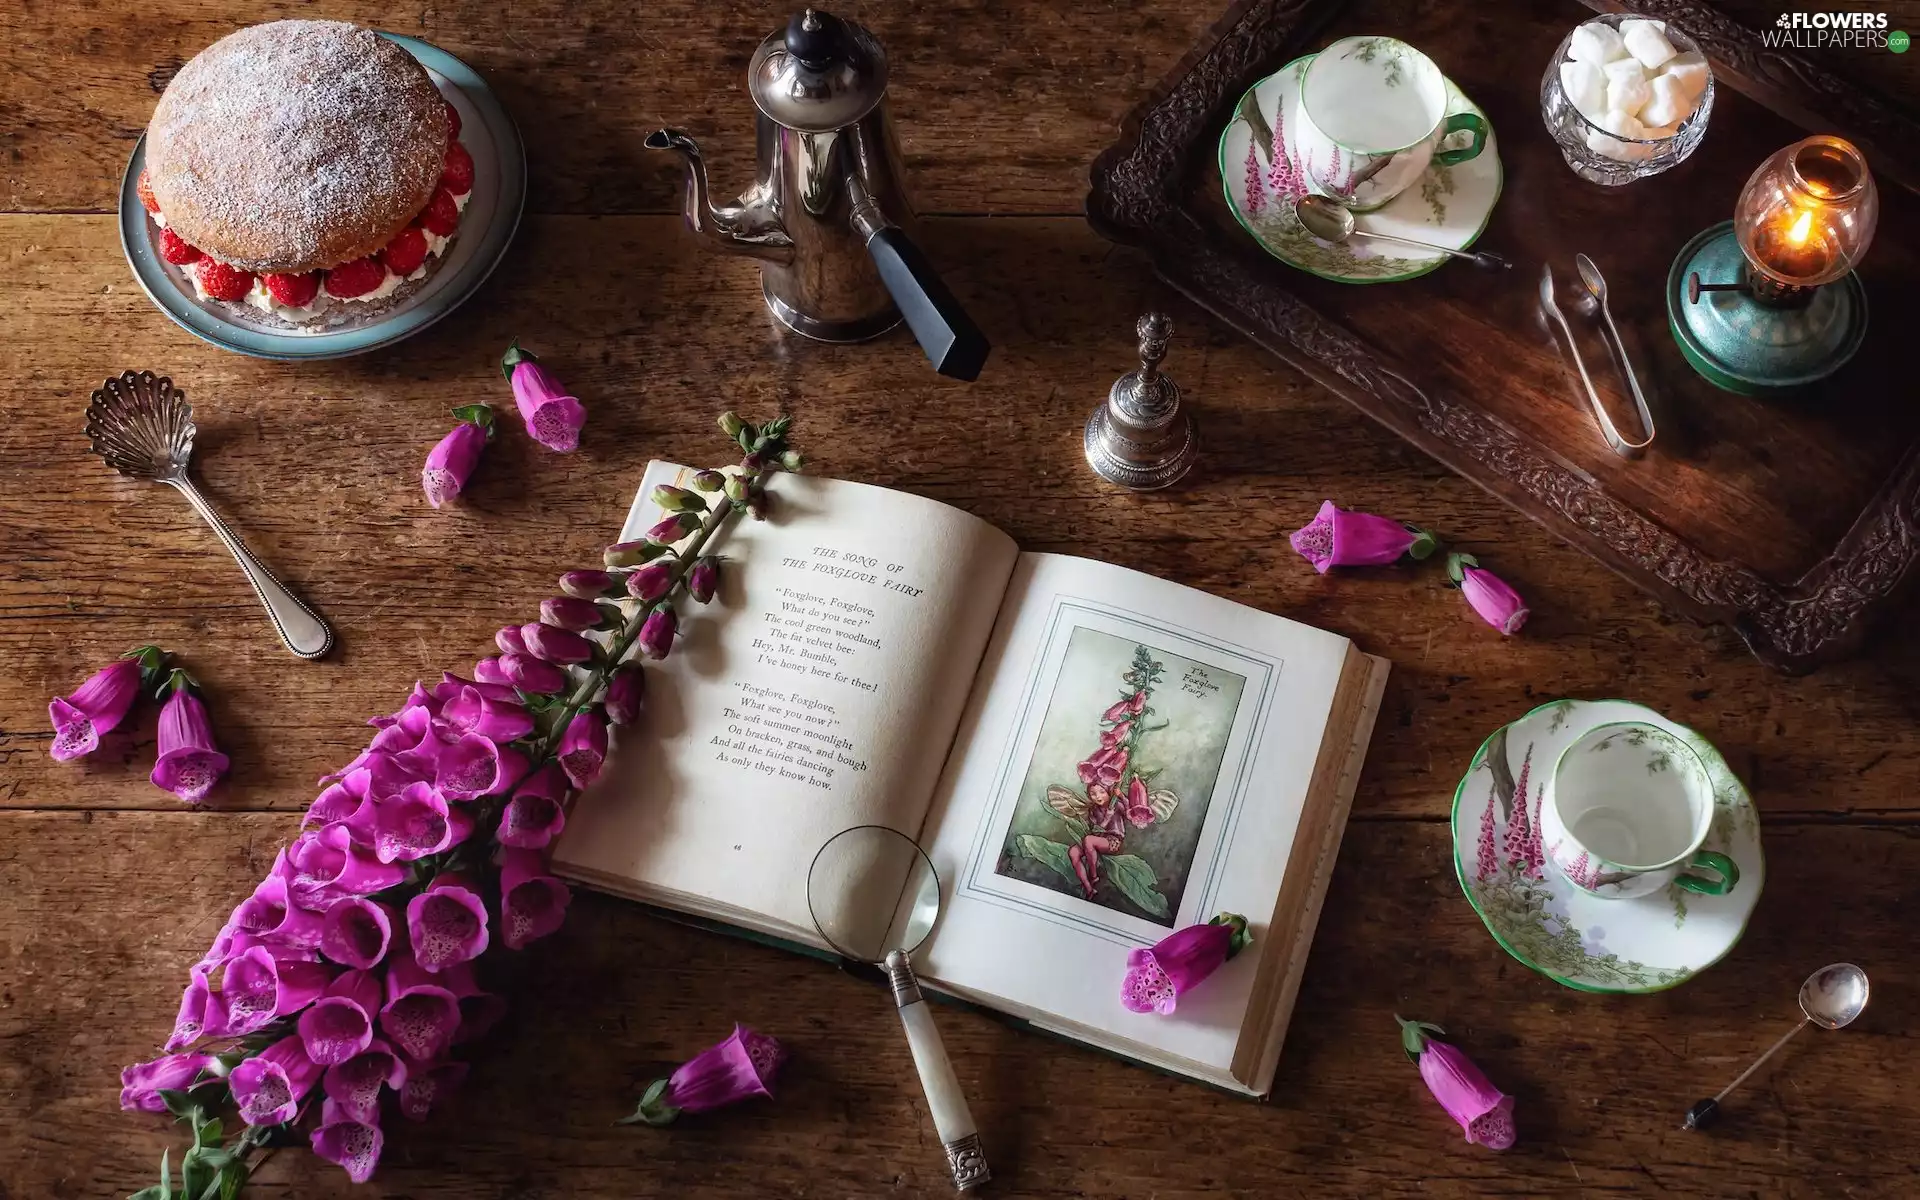 Lamp, cake, plate, Flowers, cups, Book, composition, foxglove